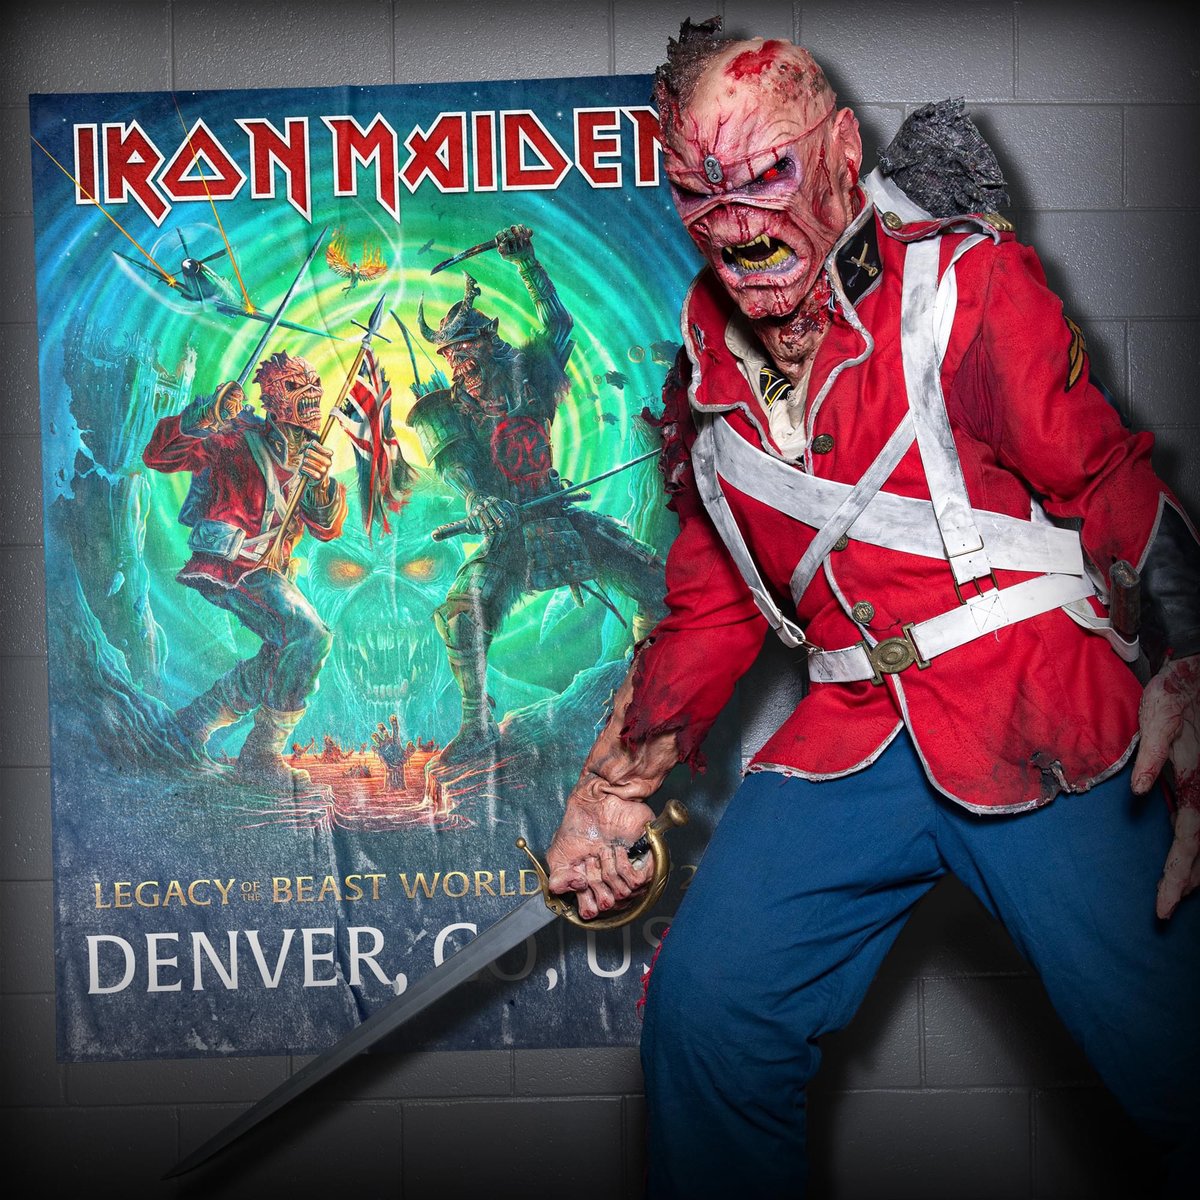 A limited number of tickets have been made available for tonight’s show in Denver! Get them here - IronMaiden.com/tours #IronMaiden #LegacyOfTheBeastWorldTour